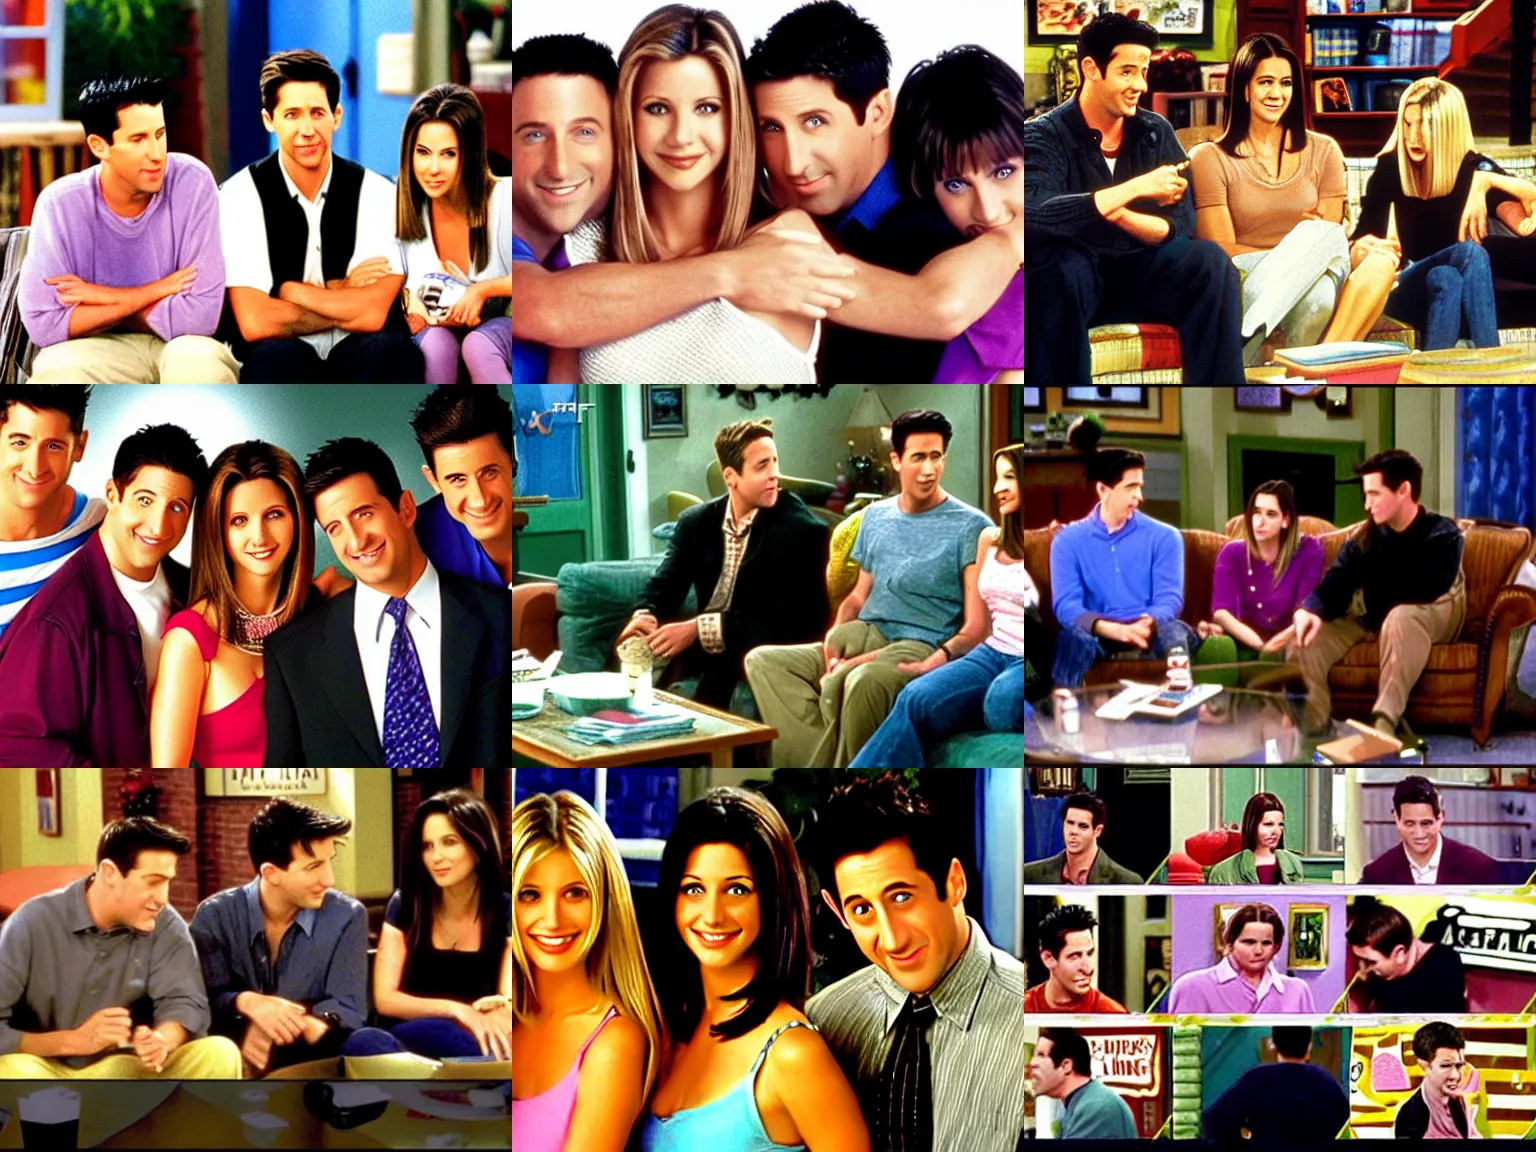 Prompt: Friends (2001) on NBC, Sony PlayStation 2 graphics.